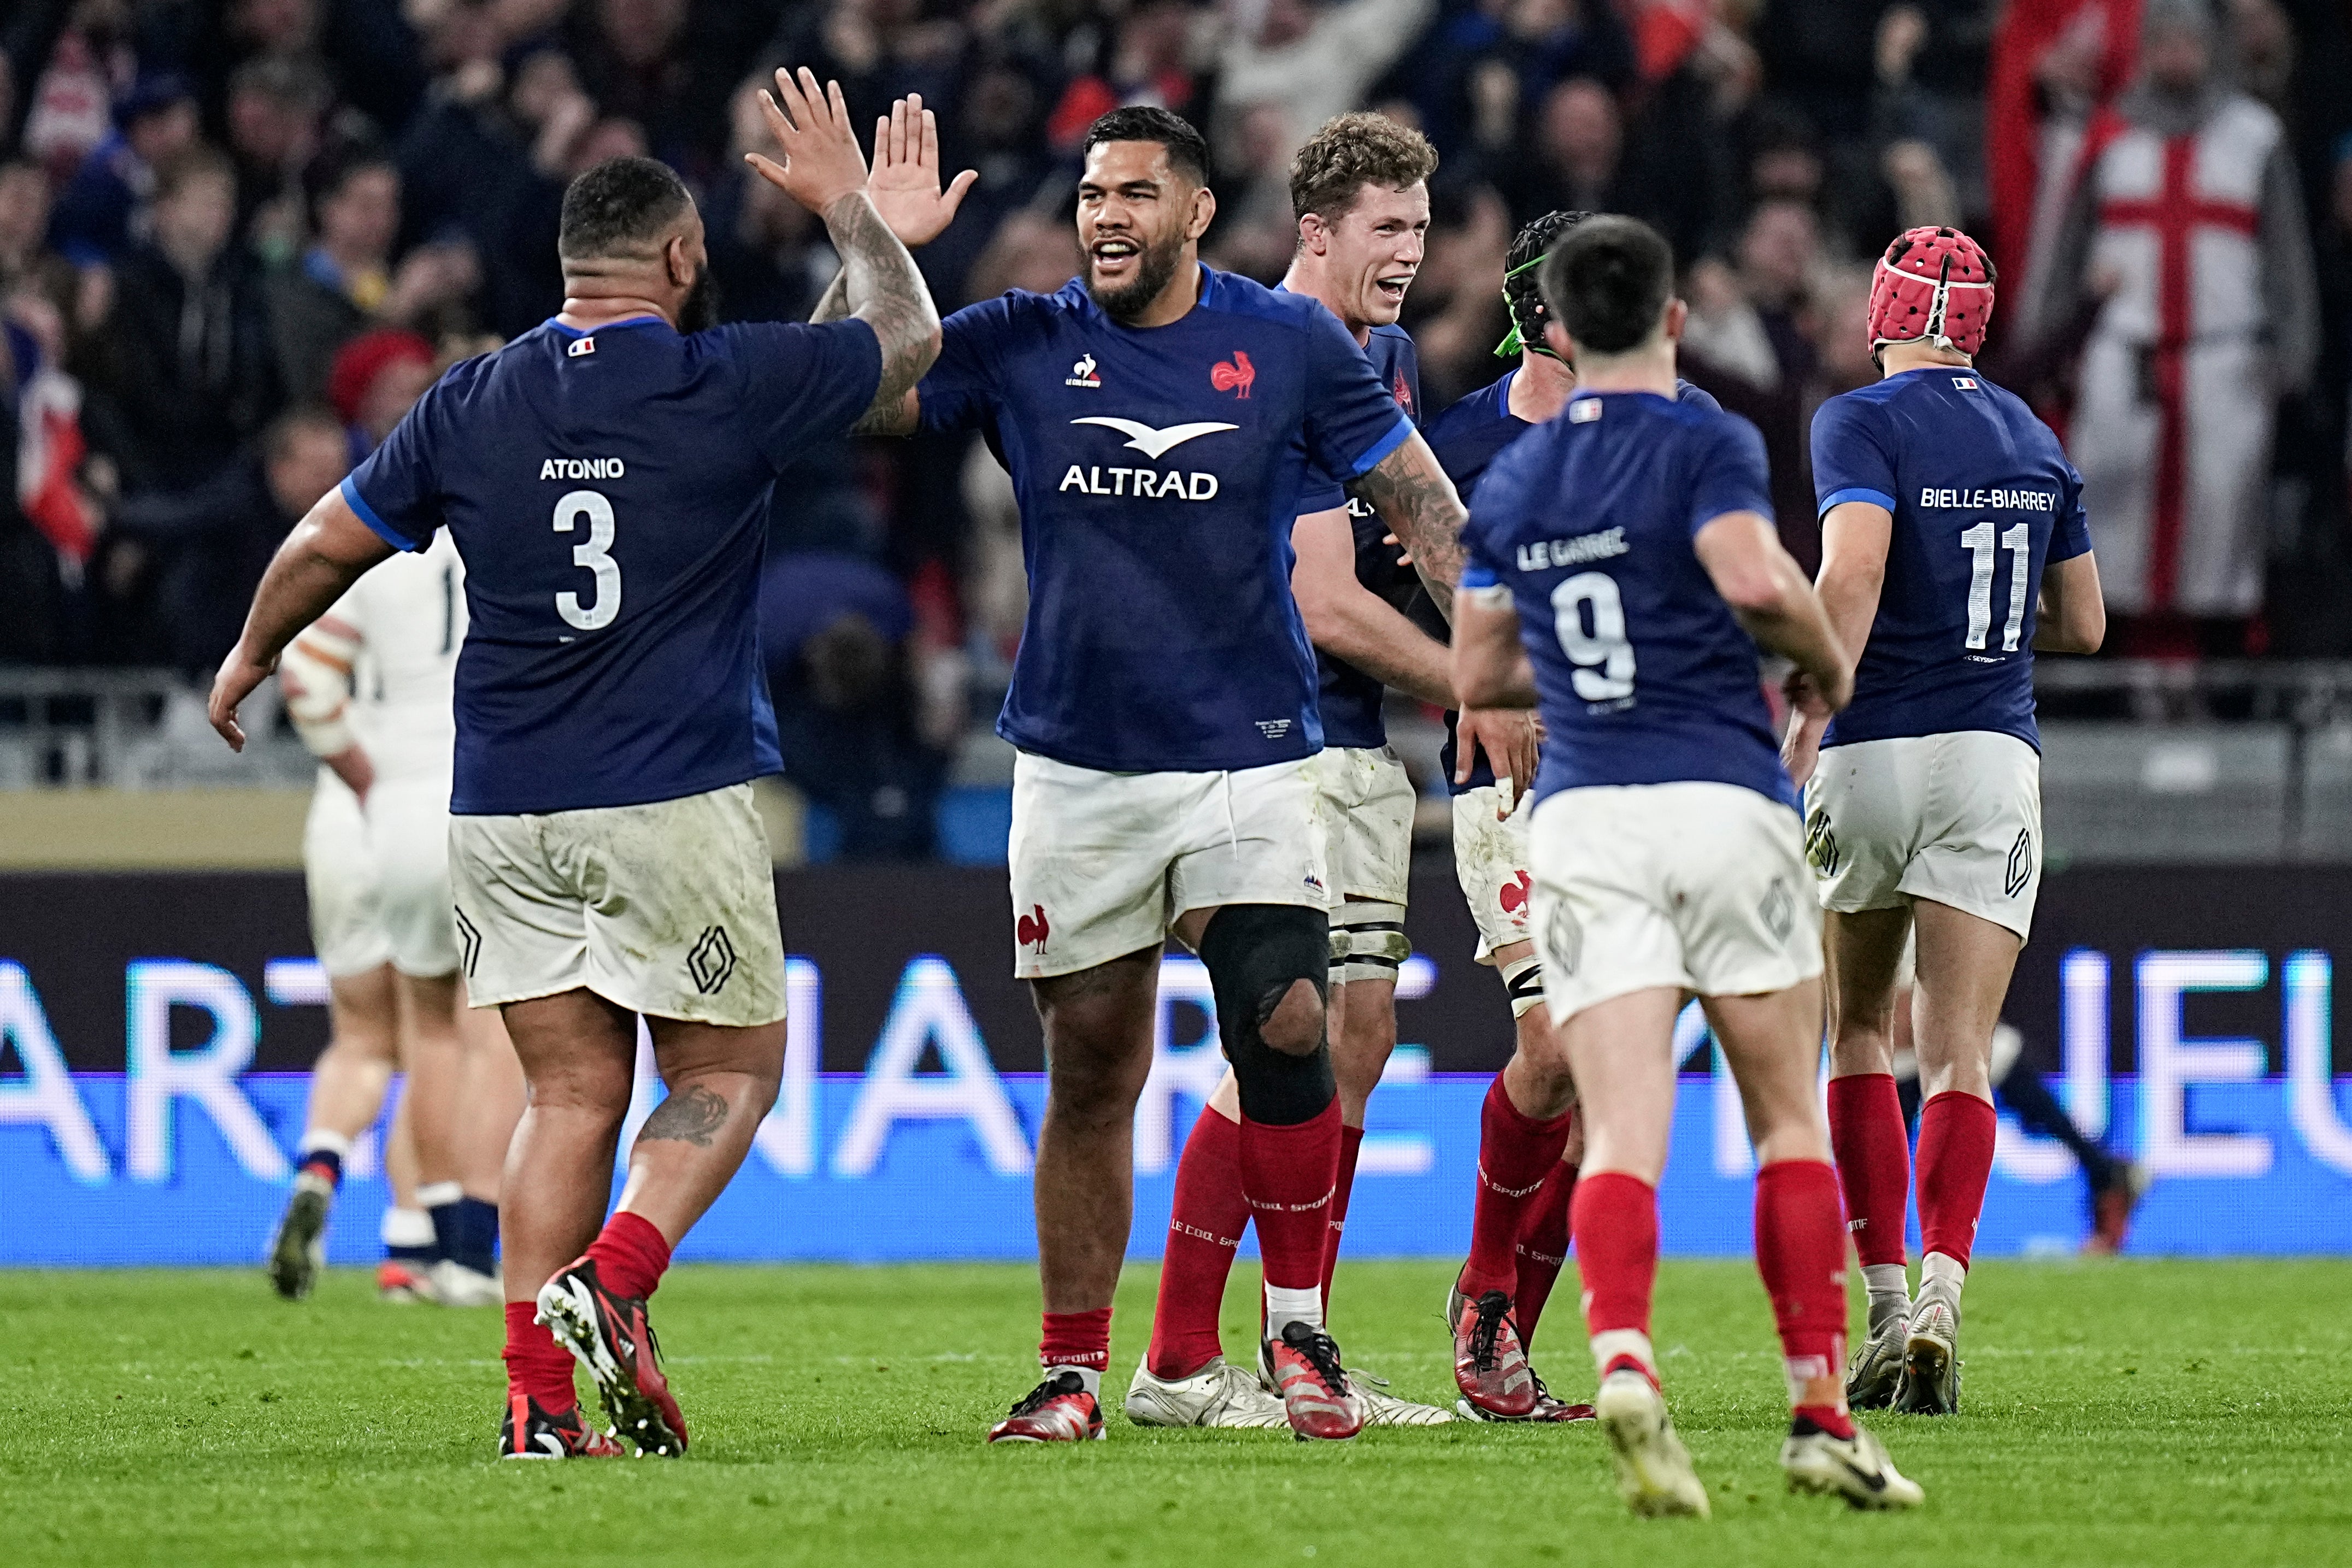 France edged England in a thrilling match